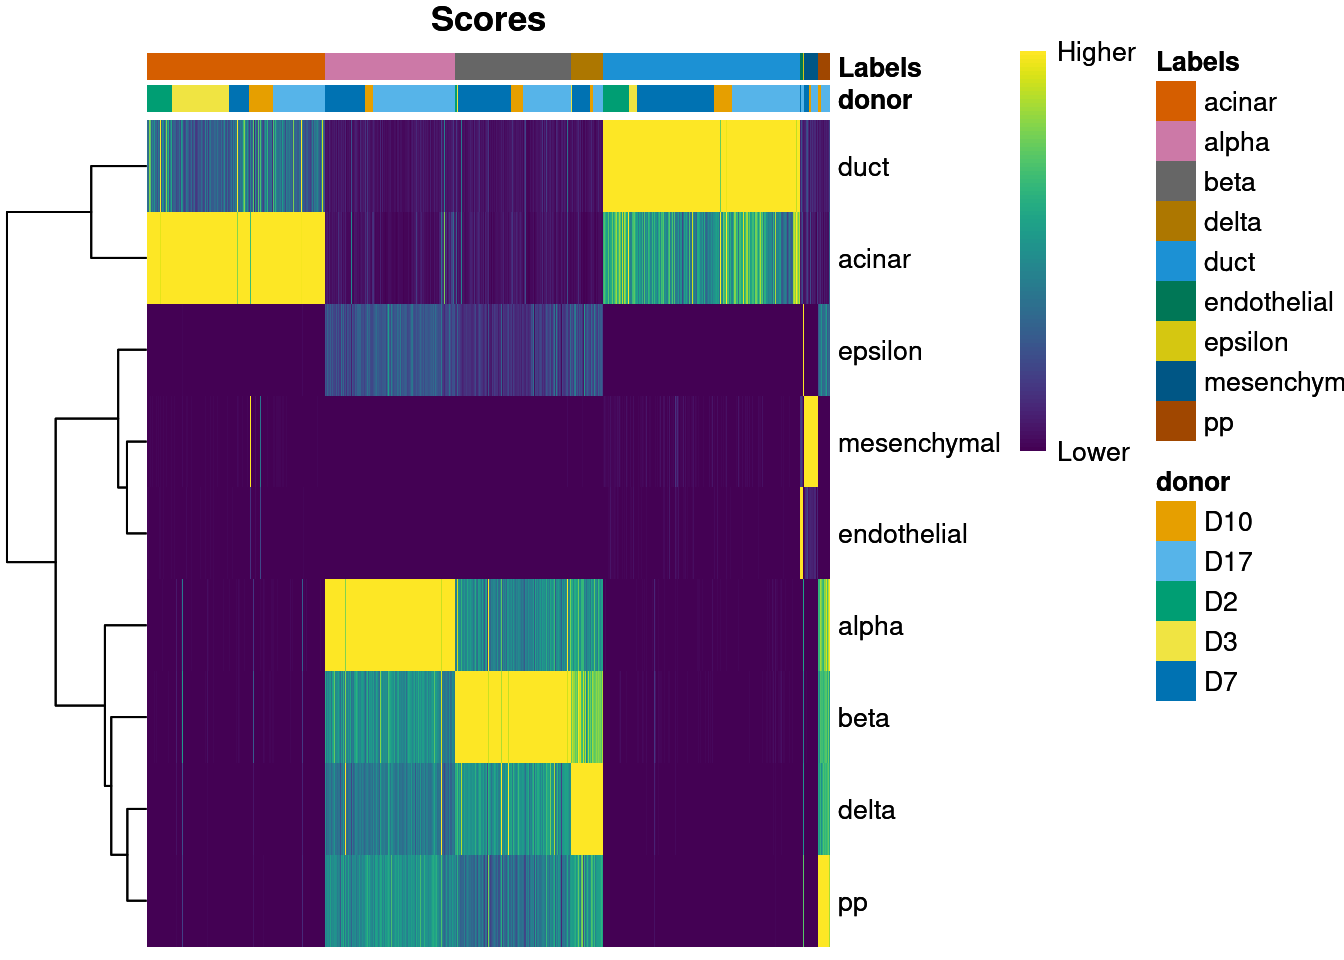 Heatmap of normalized scores for the Grun dataset, including the donor of origin for each cell.